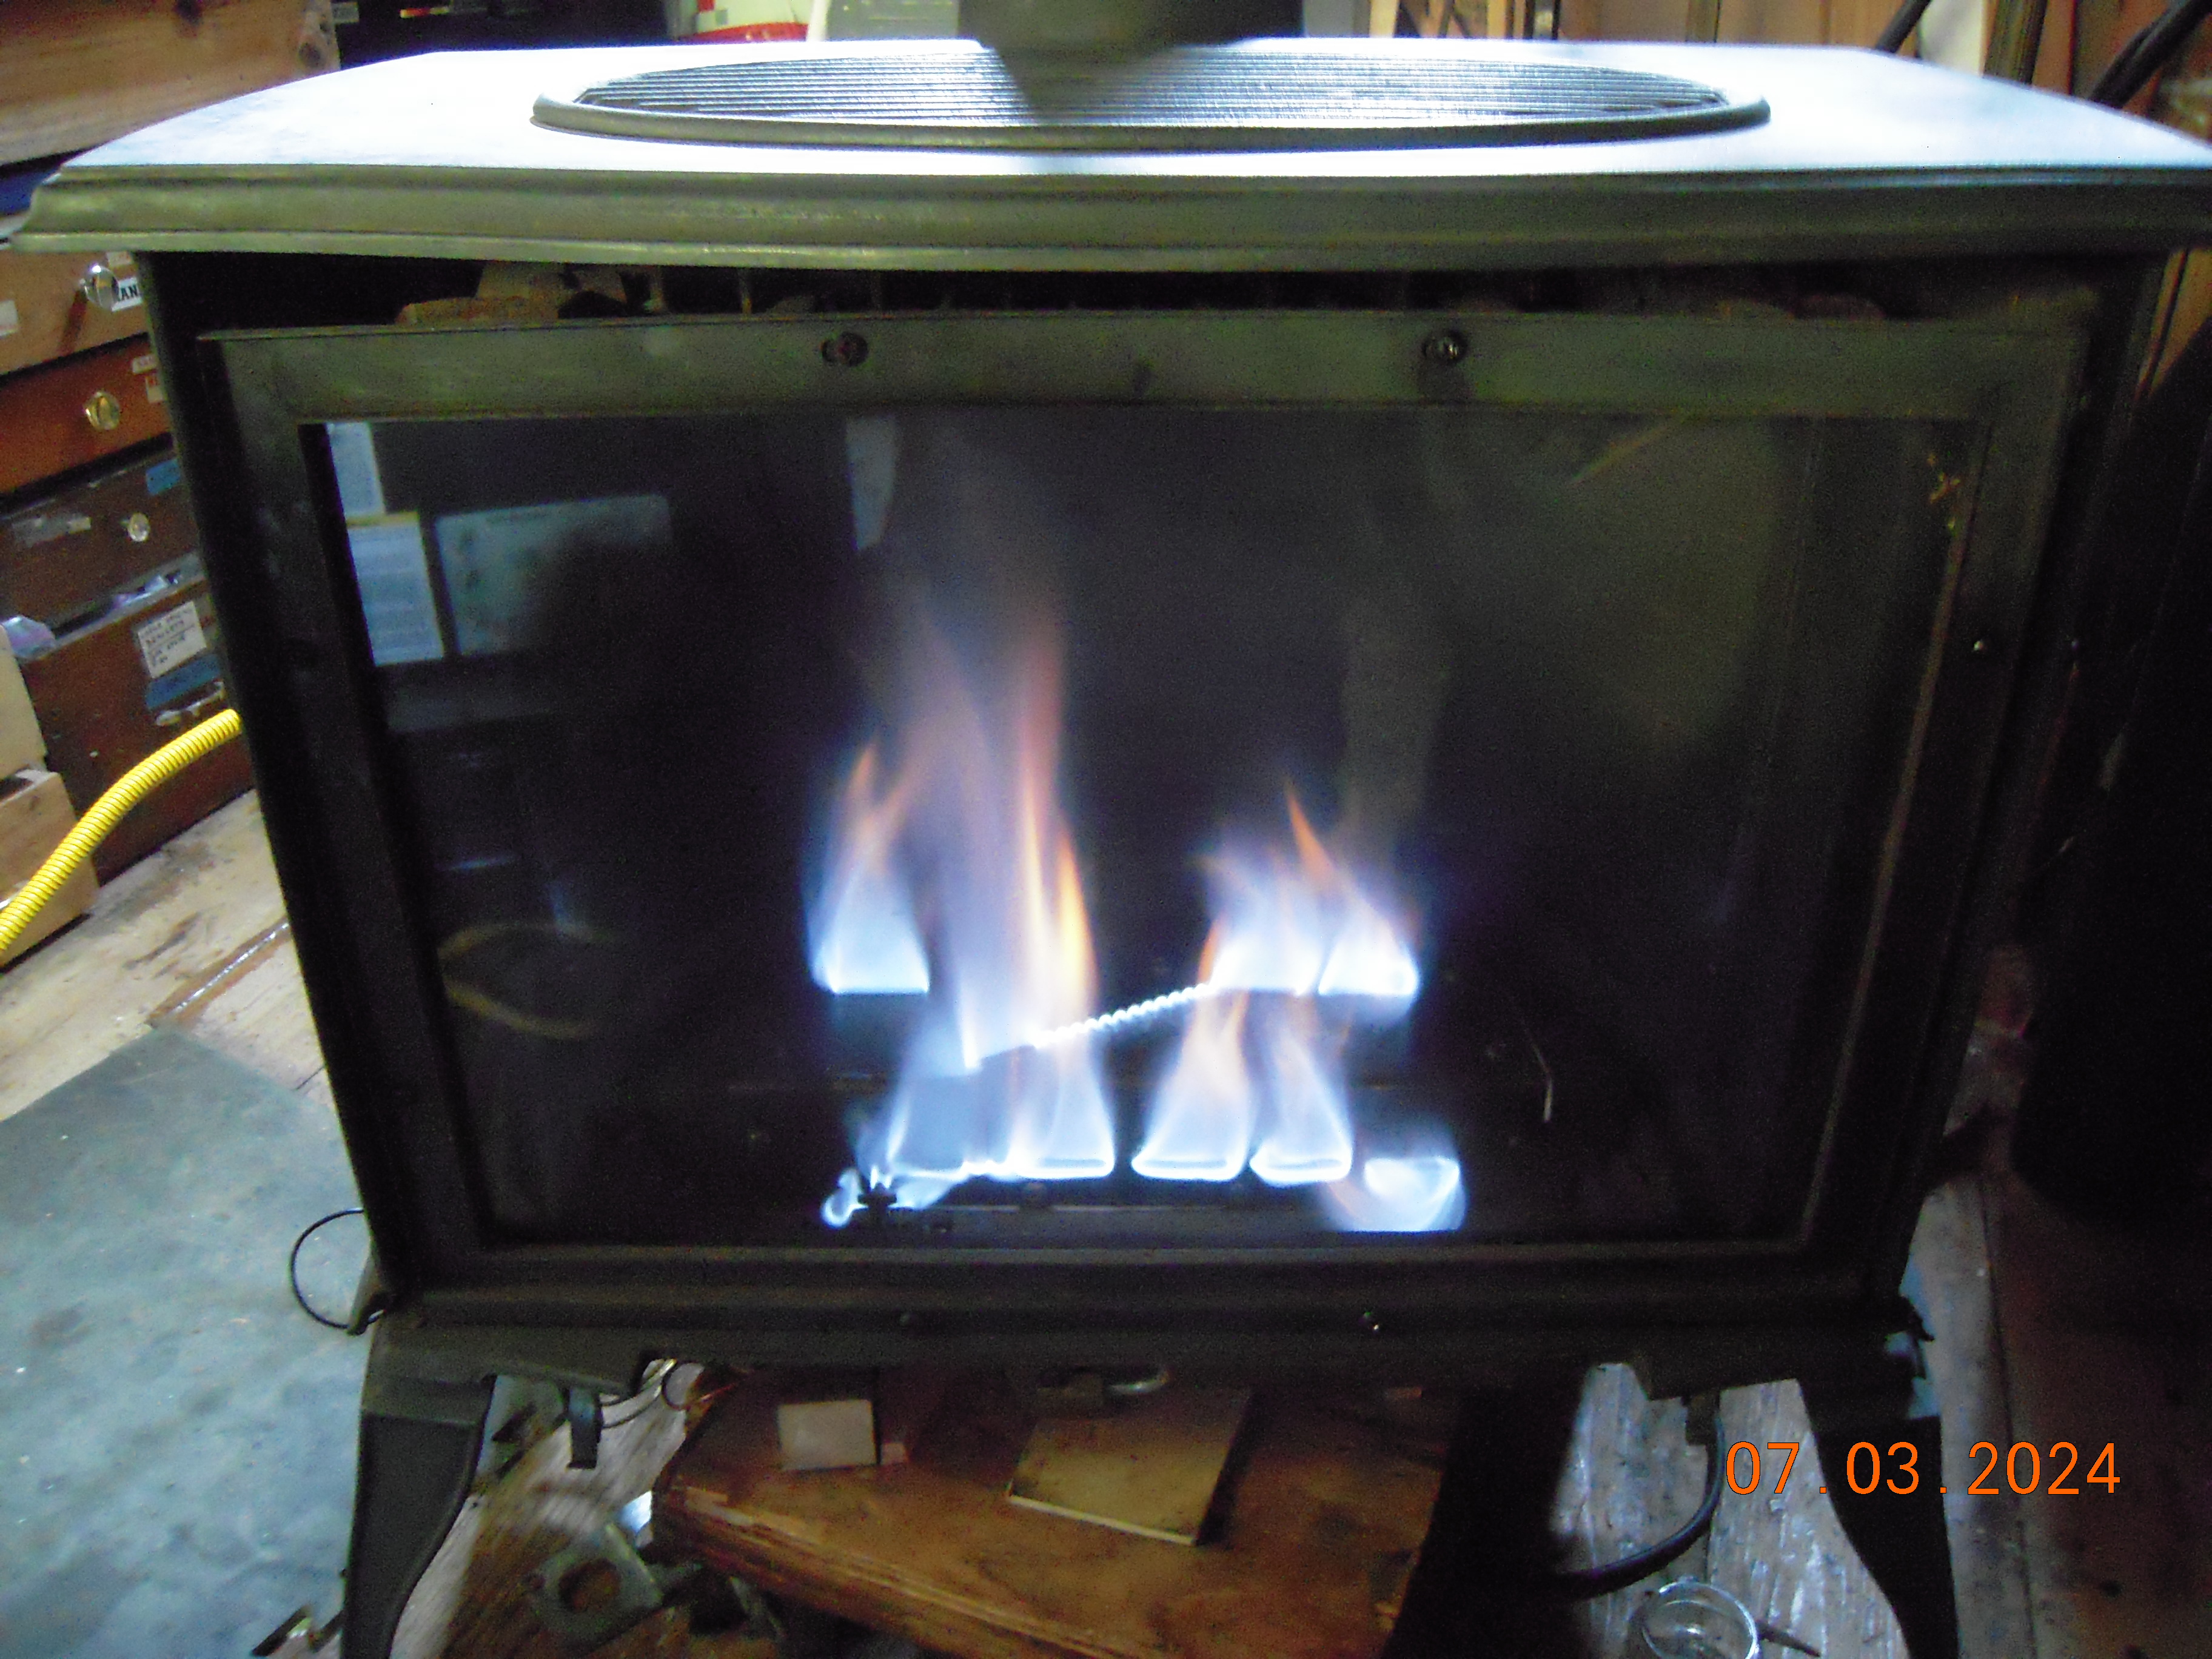 Vermont Castings Radiance 2560 gas stove conversion to Natural Gas and parts